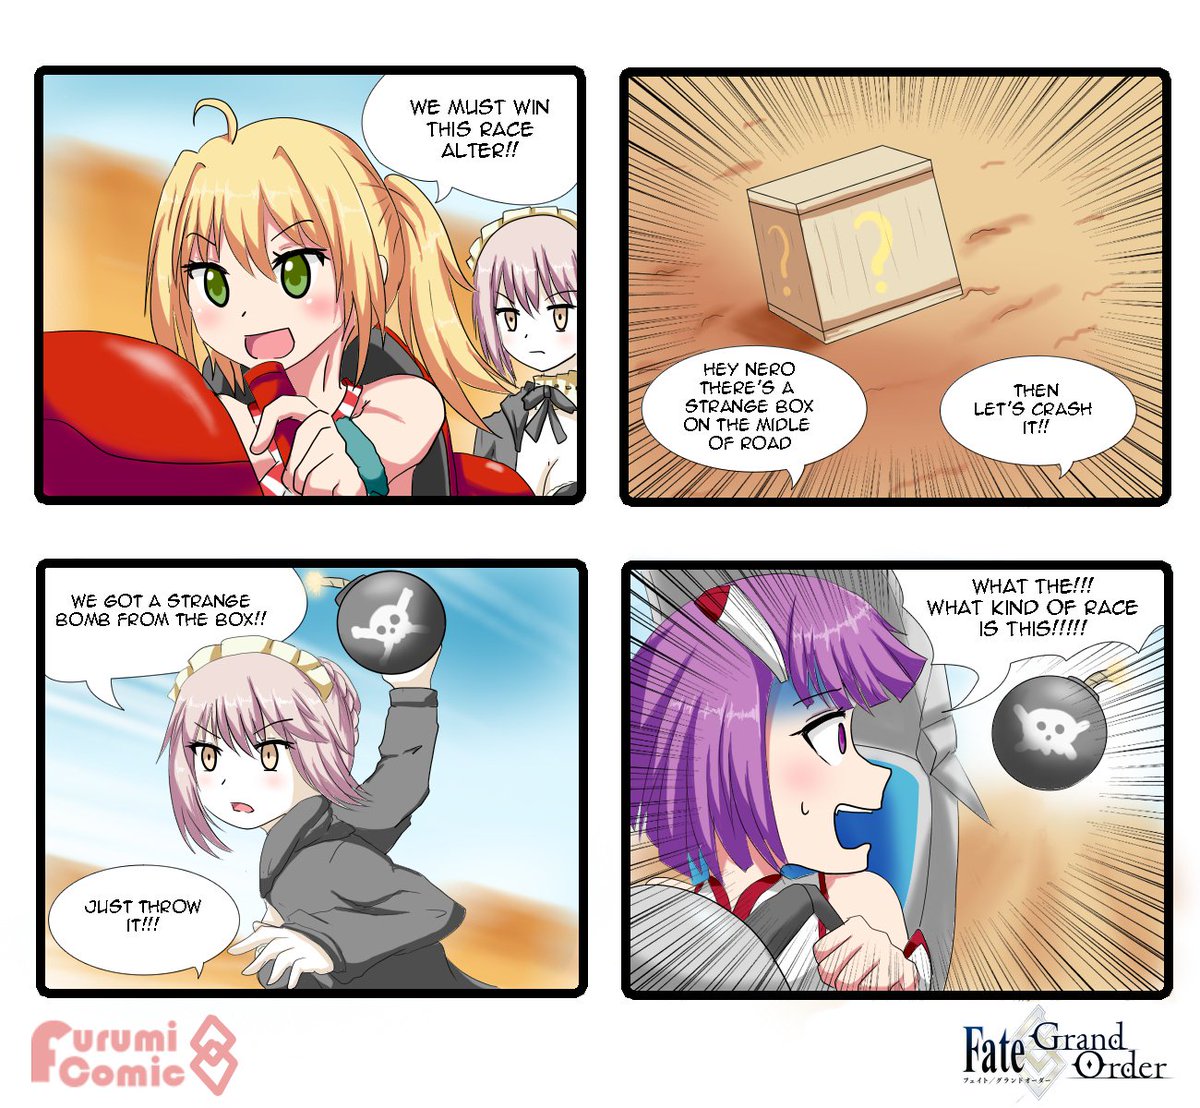 Updated new comic
check my previous comic from FB page:https://t.co/vXrBaK61vl
please support me @ patreon: https://t.co/MAqe6zZIdp
#FateGO 